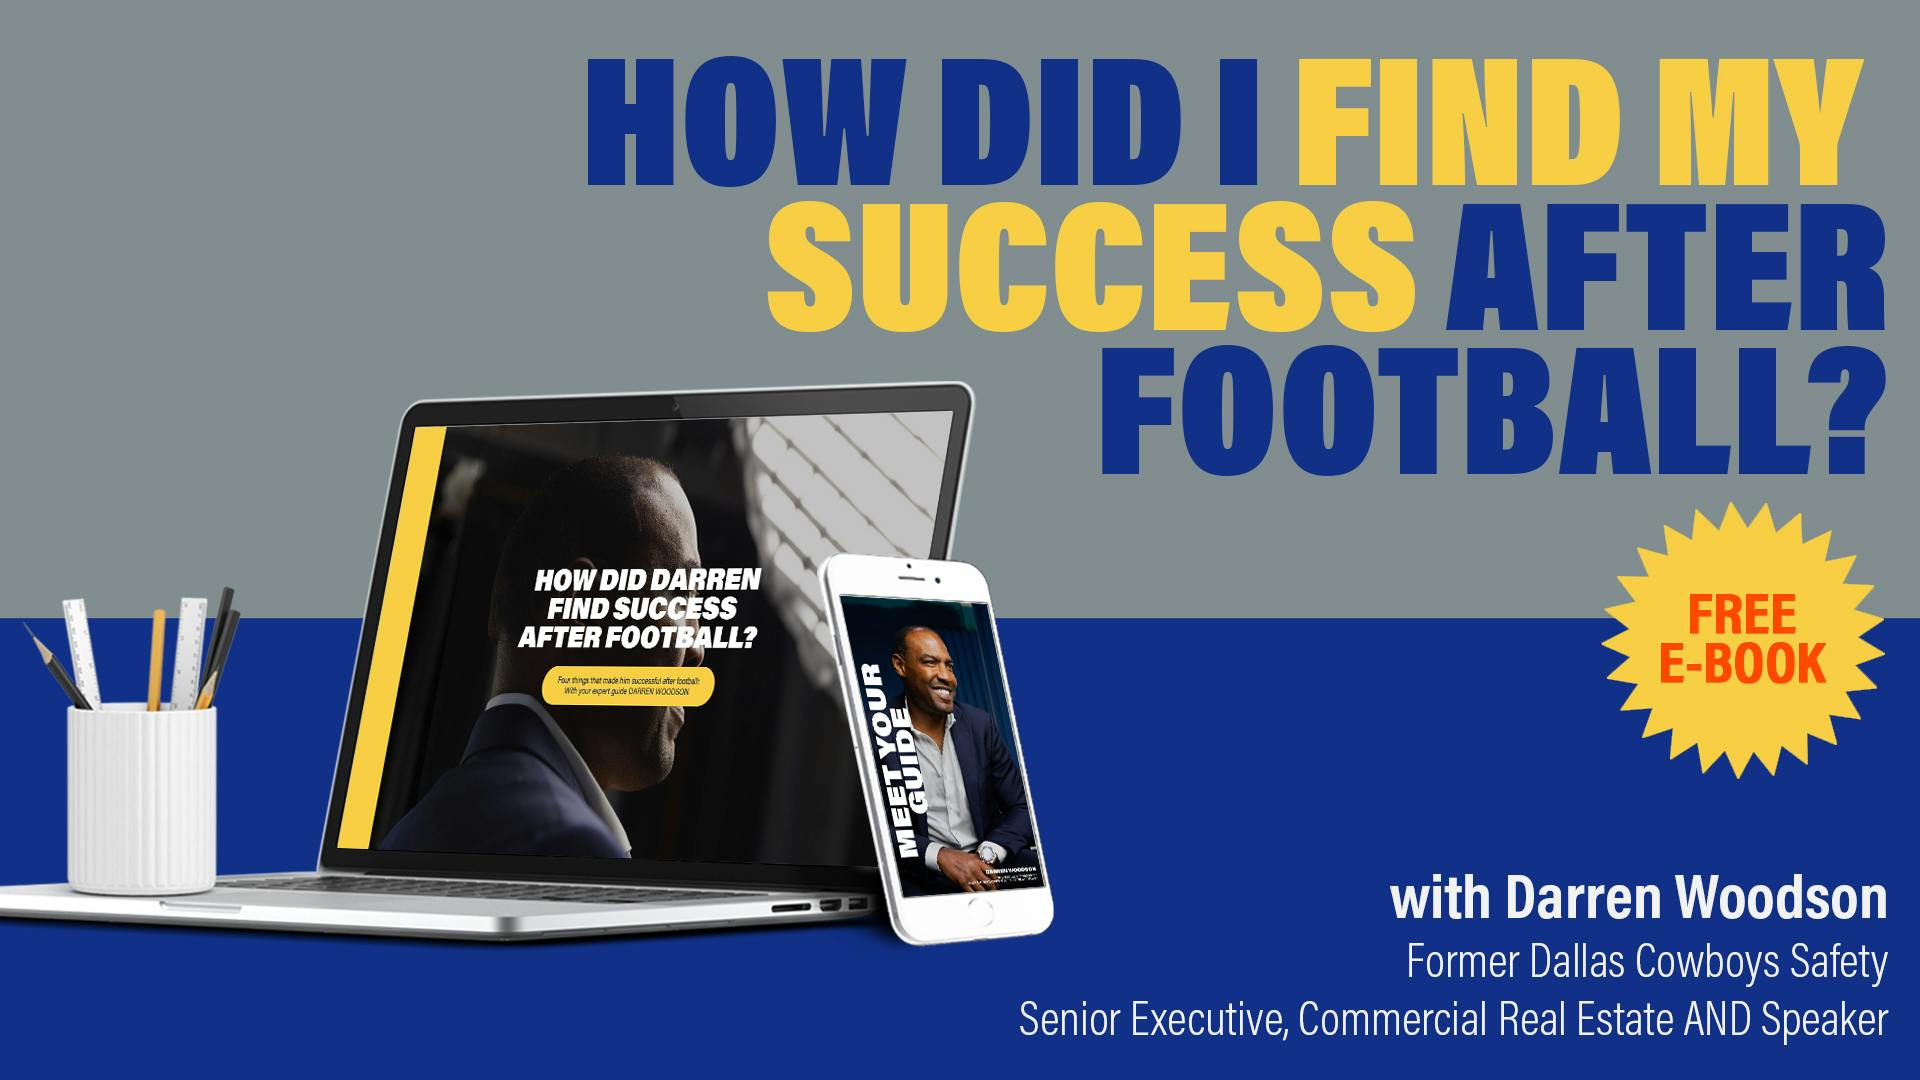 How Did Darren Woodson Find Success After Football?